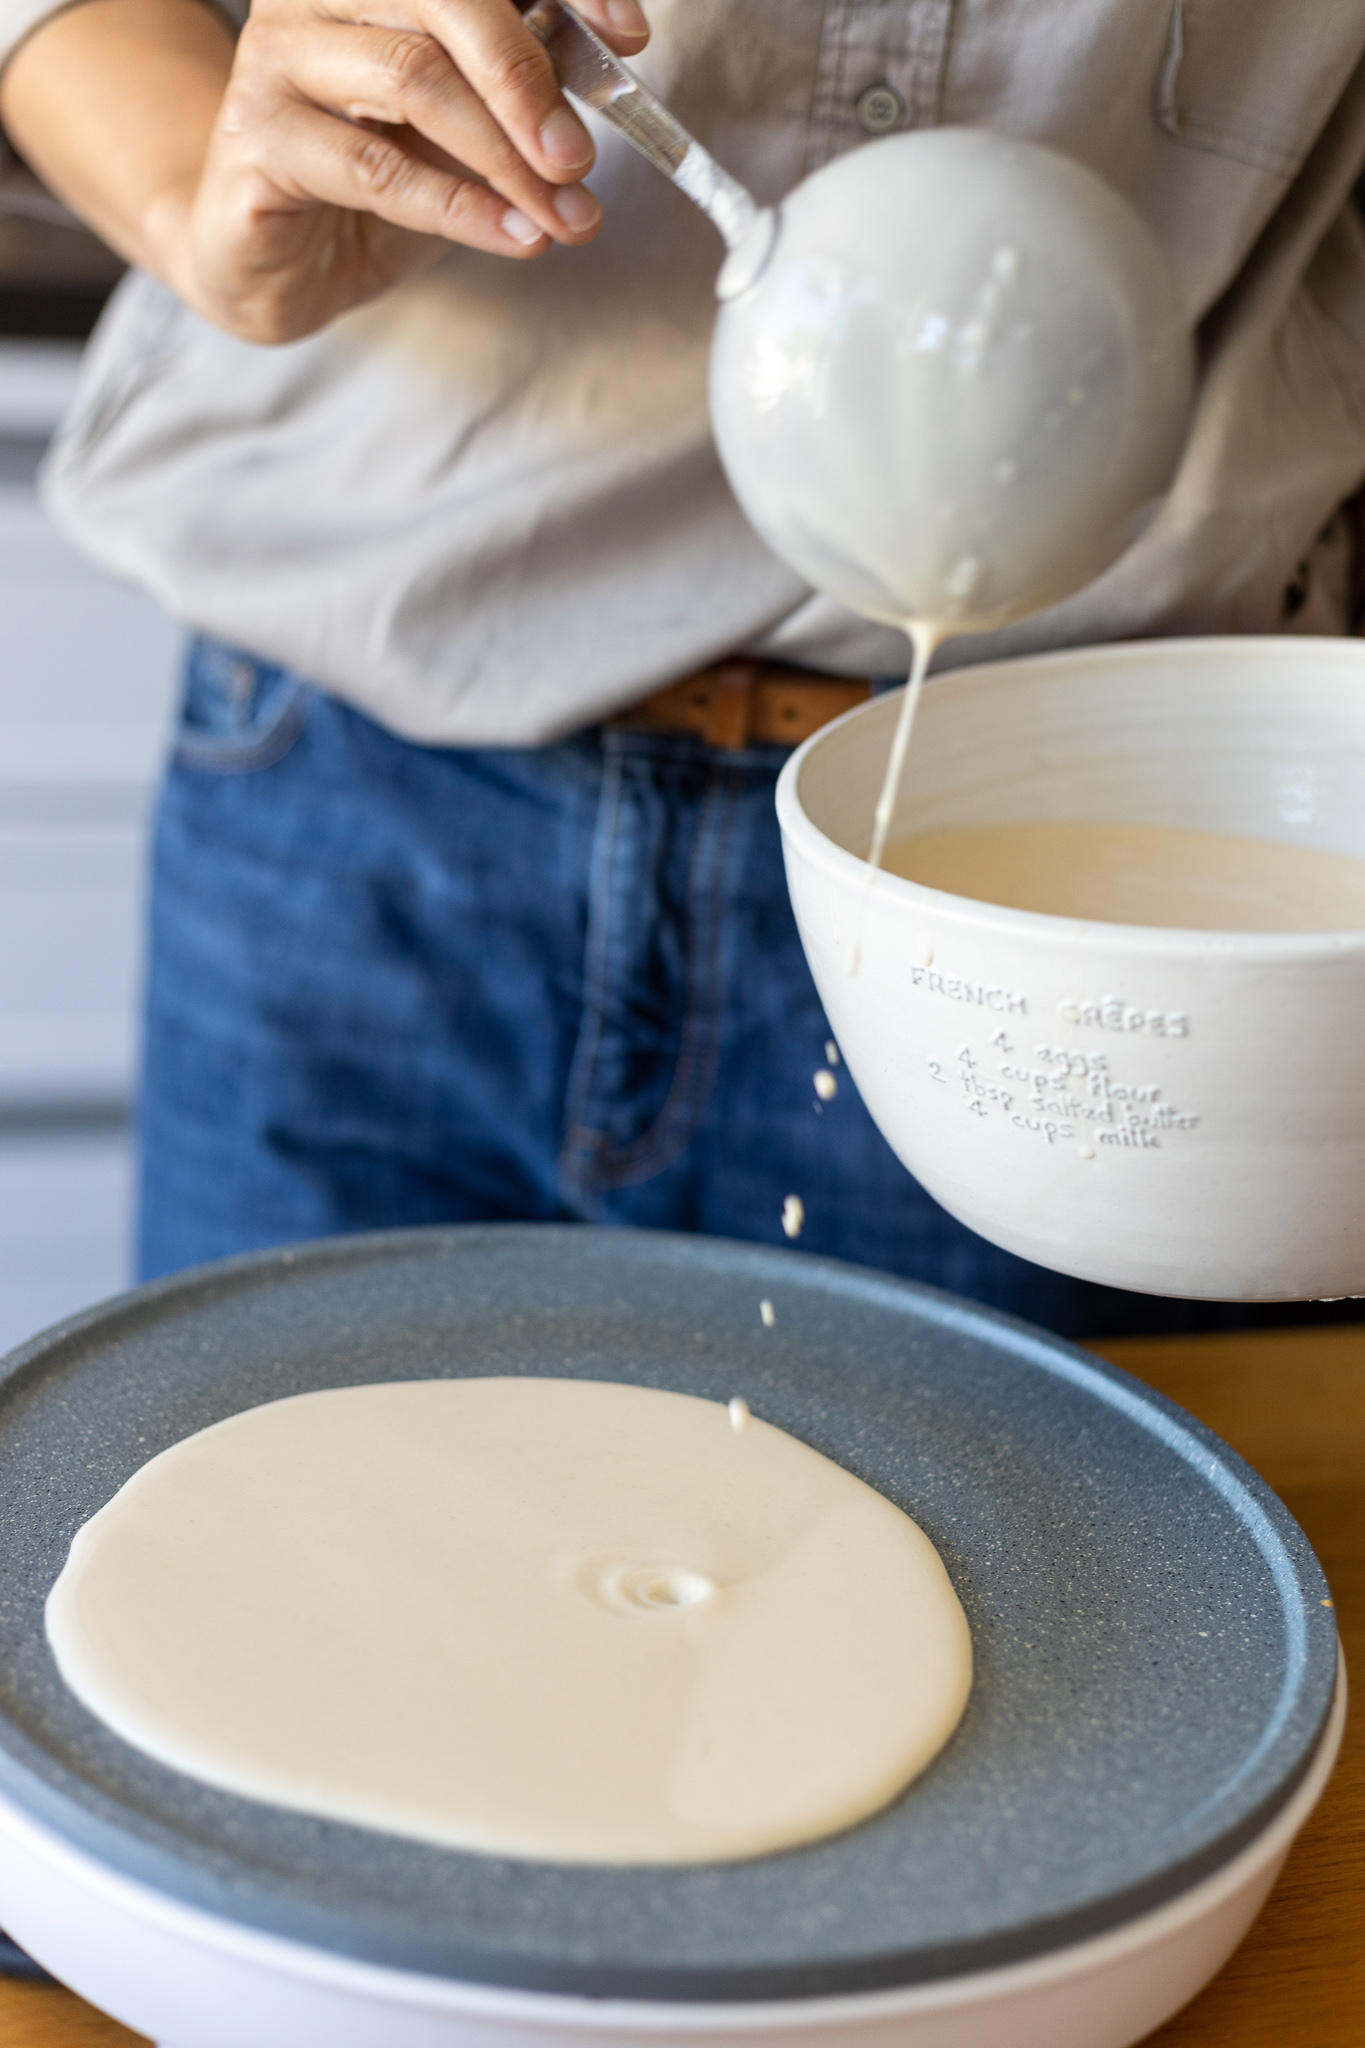 Pouring crepe batter on a stone machine